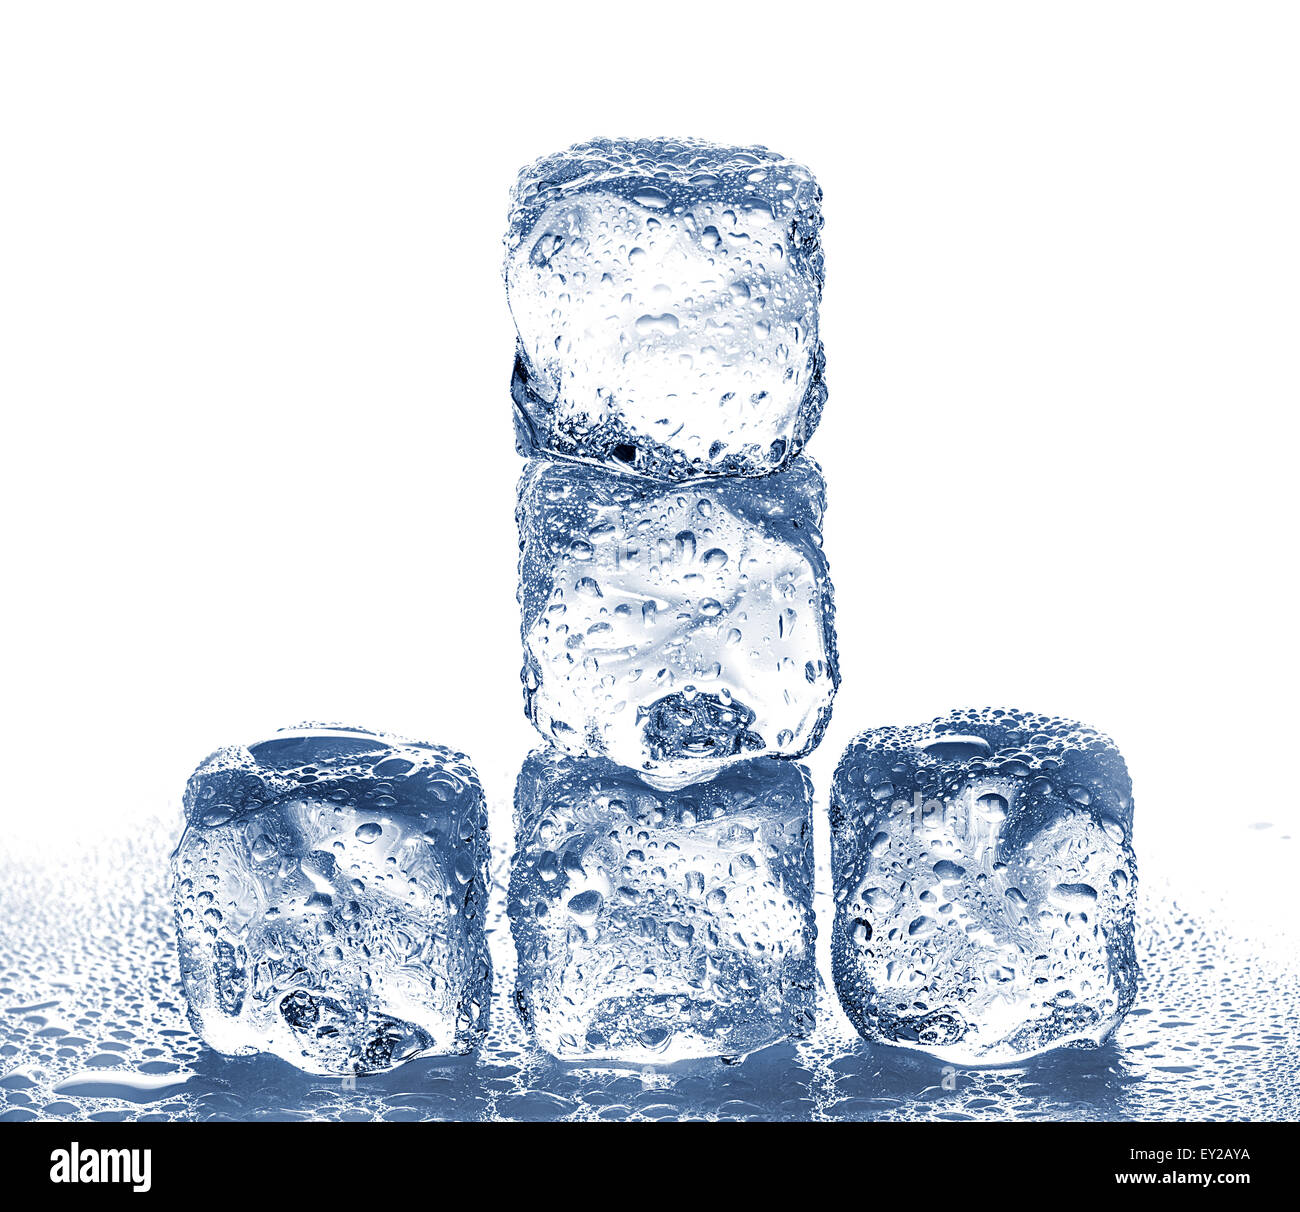 https://c8.alamy.com/comp/EY2AYA/ice-cubes-with-water-drops-close-up-isolated-on-a-white-background-EY2AYA.jpg